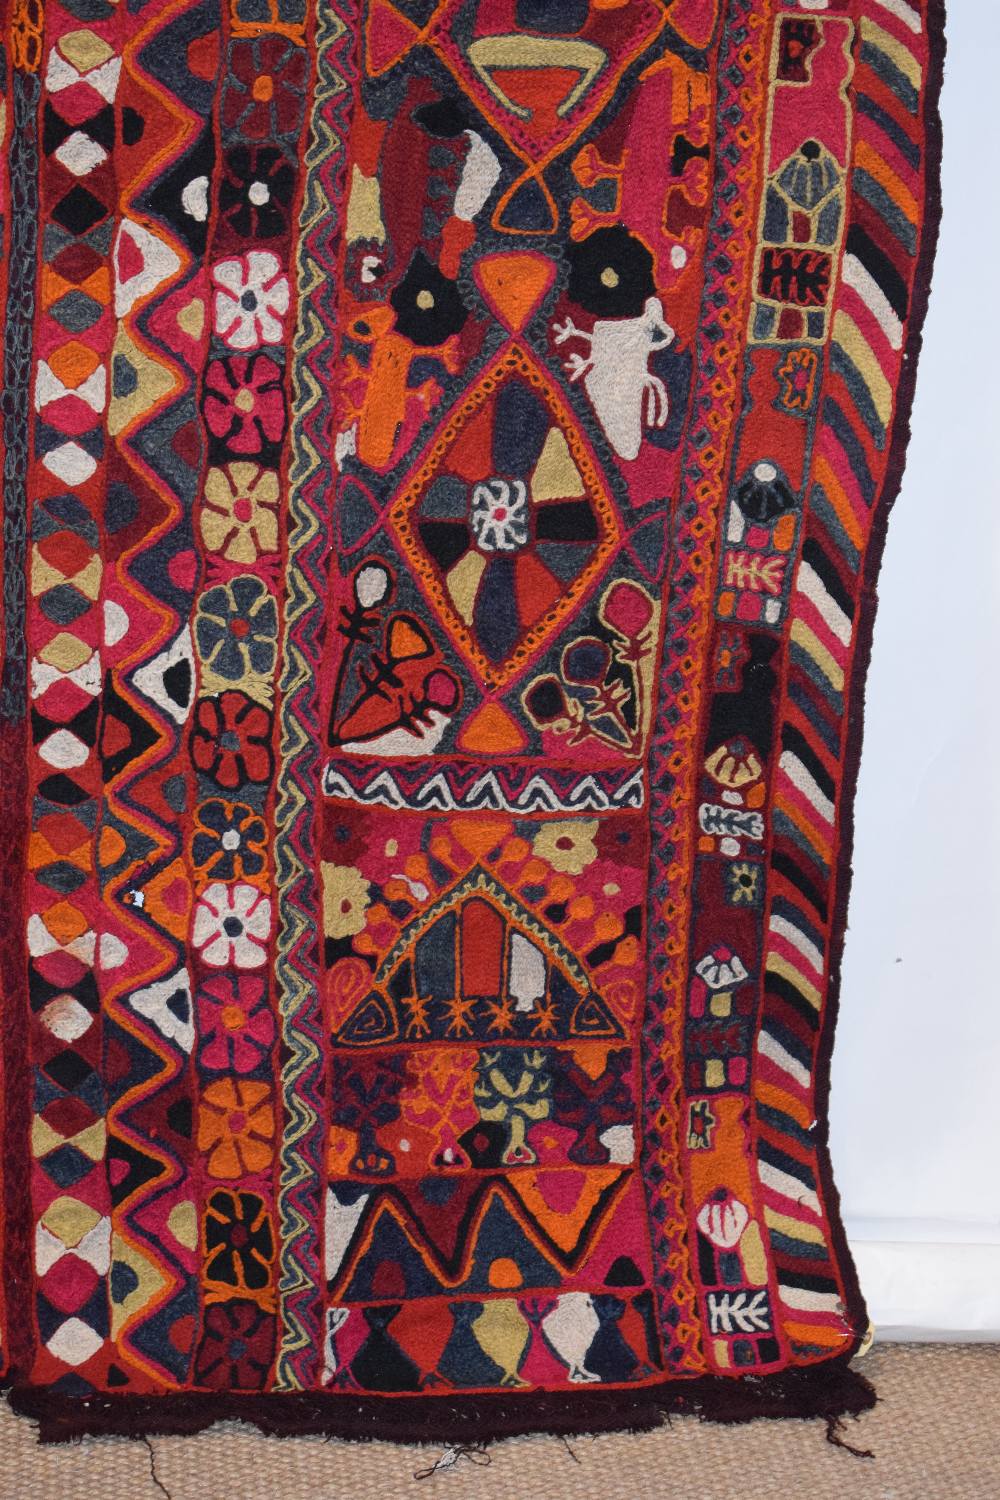 Iraqi embroidered wedding blanket, Samawa, Marshlands of southern Iraq, 20th century, 8ft. 7in. X - Image 2 of 10